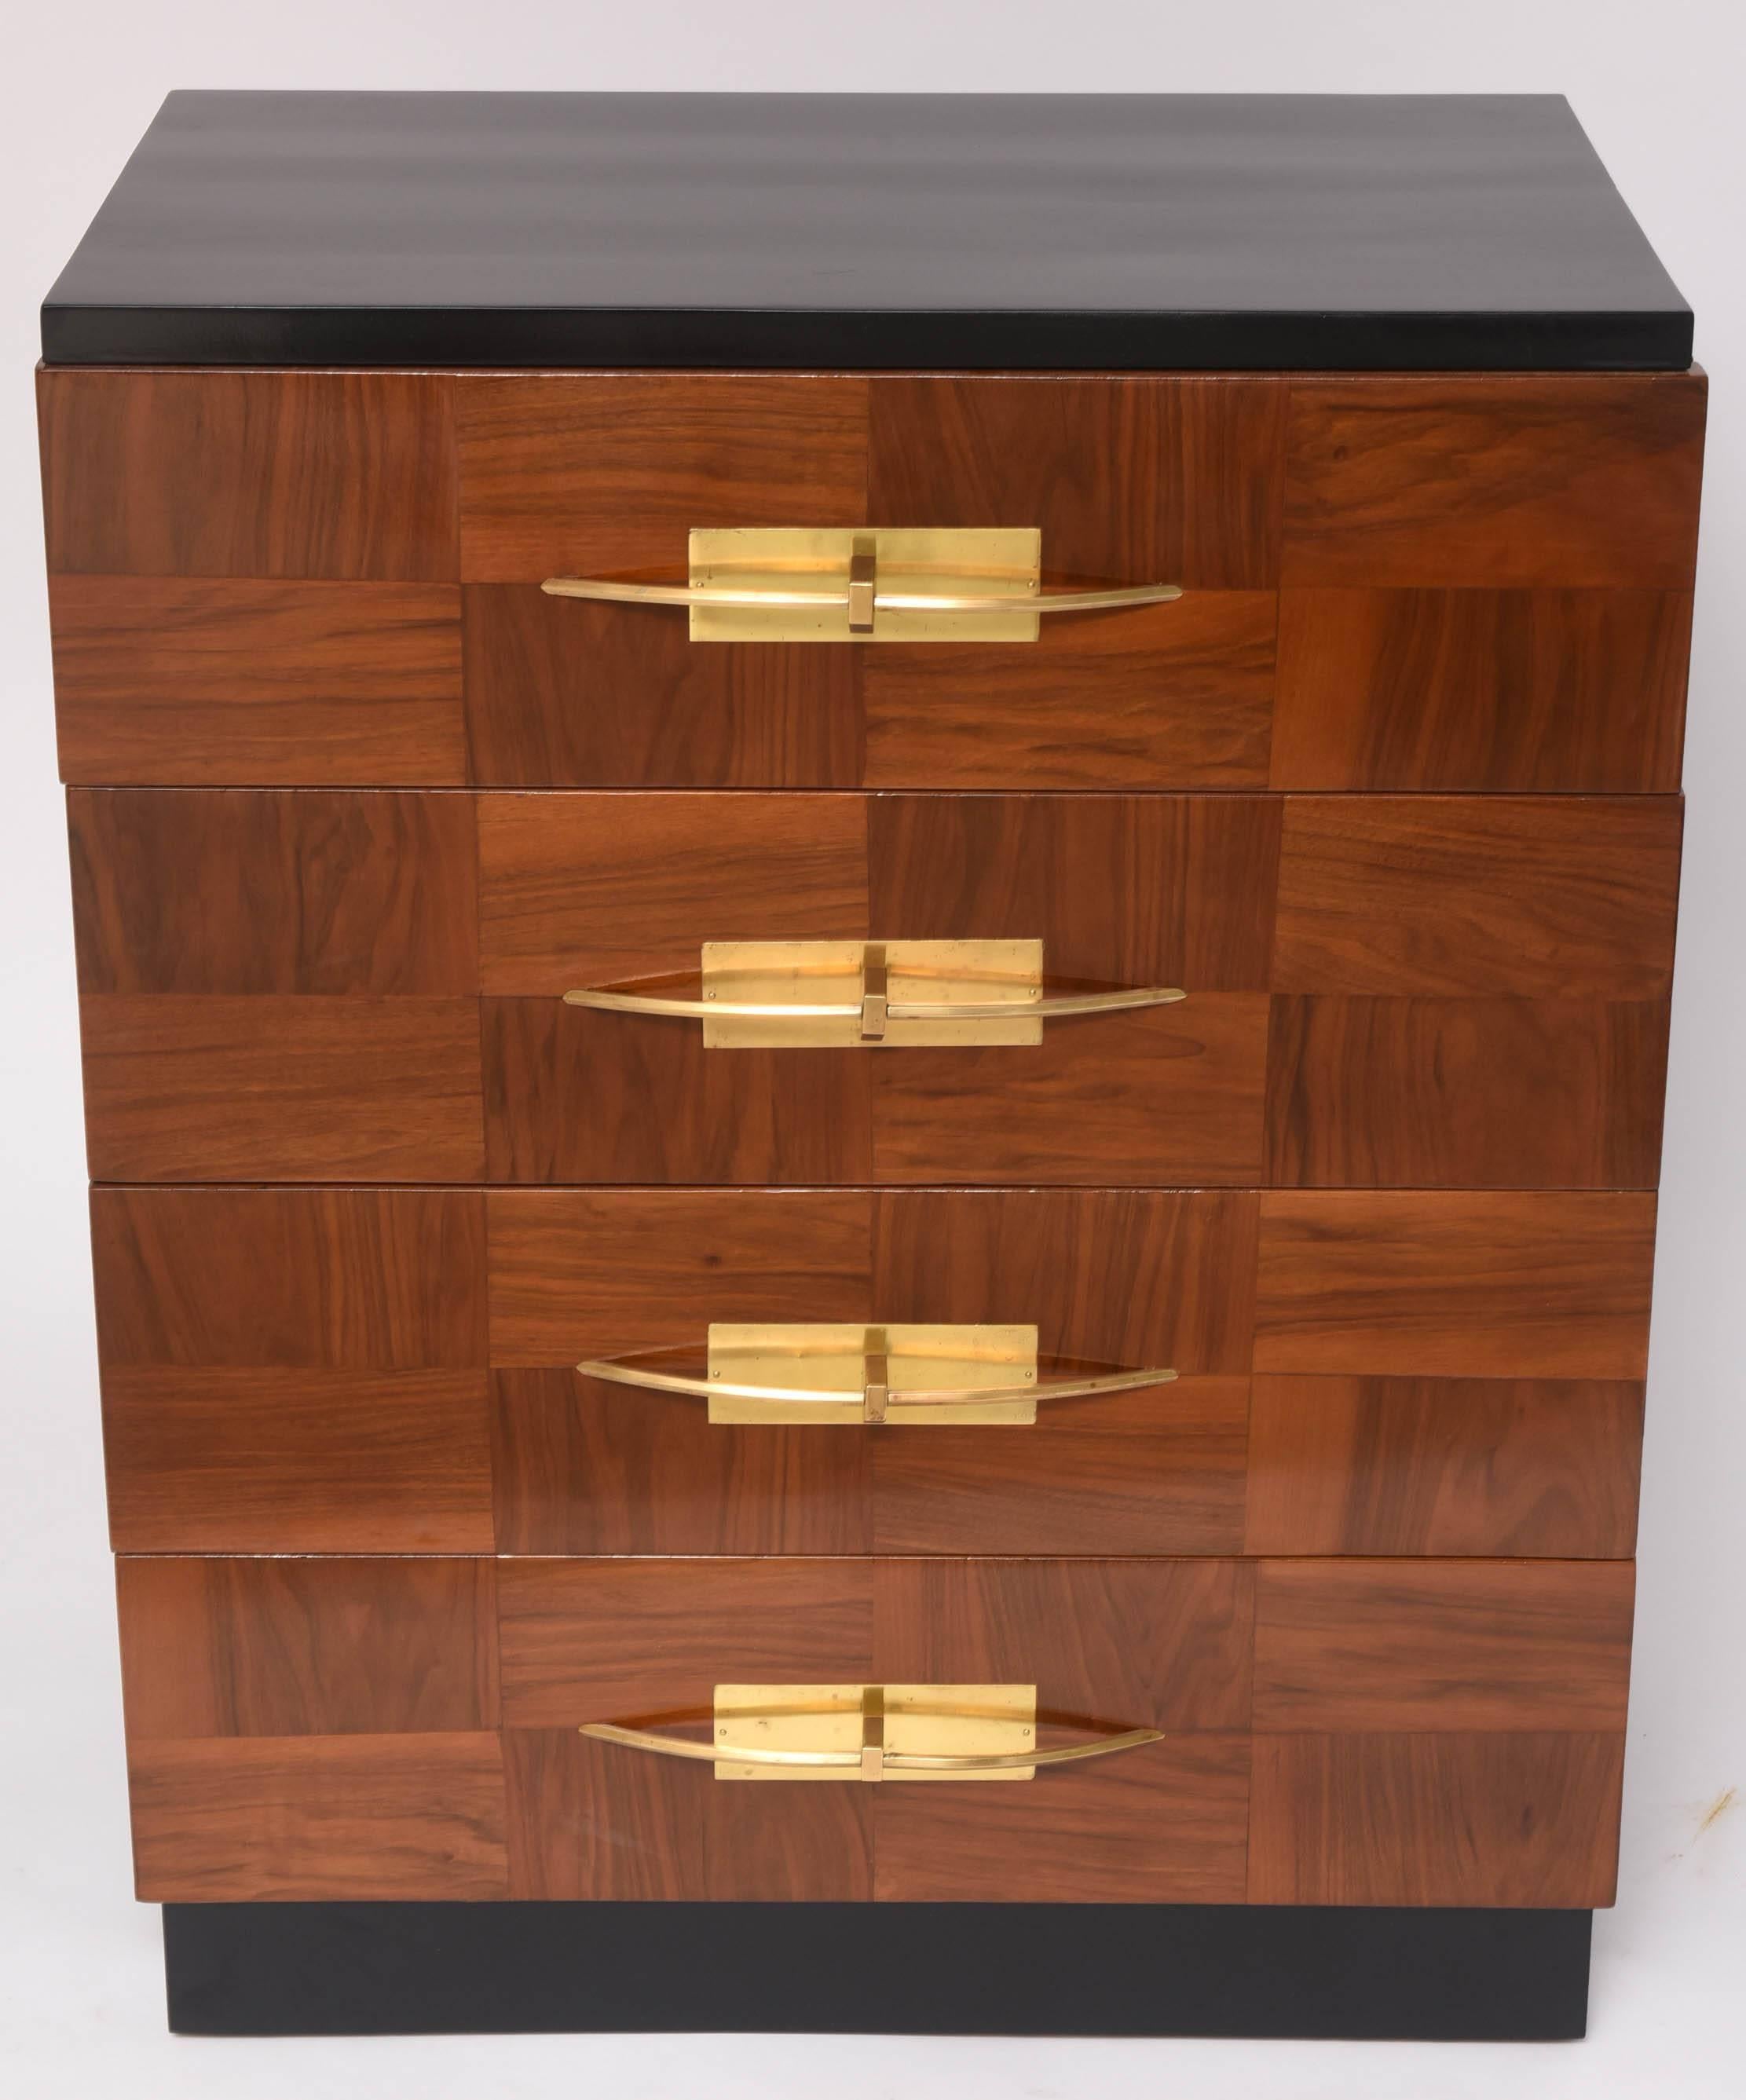 This stylish four-drawer chest dates from the early 1940s and has been professionally restored. The drawers are veneered in a patch-work pattern with polished brass handles. The sides and top are lacquered black as is the toe-kick space.

    